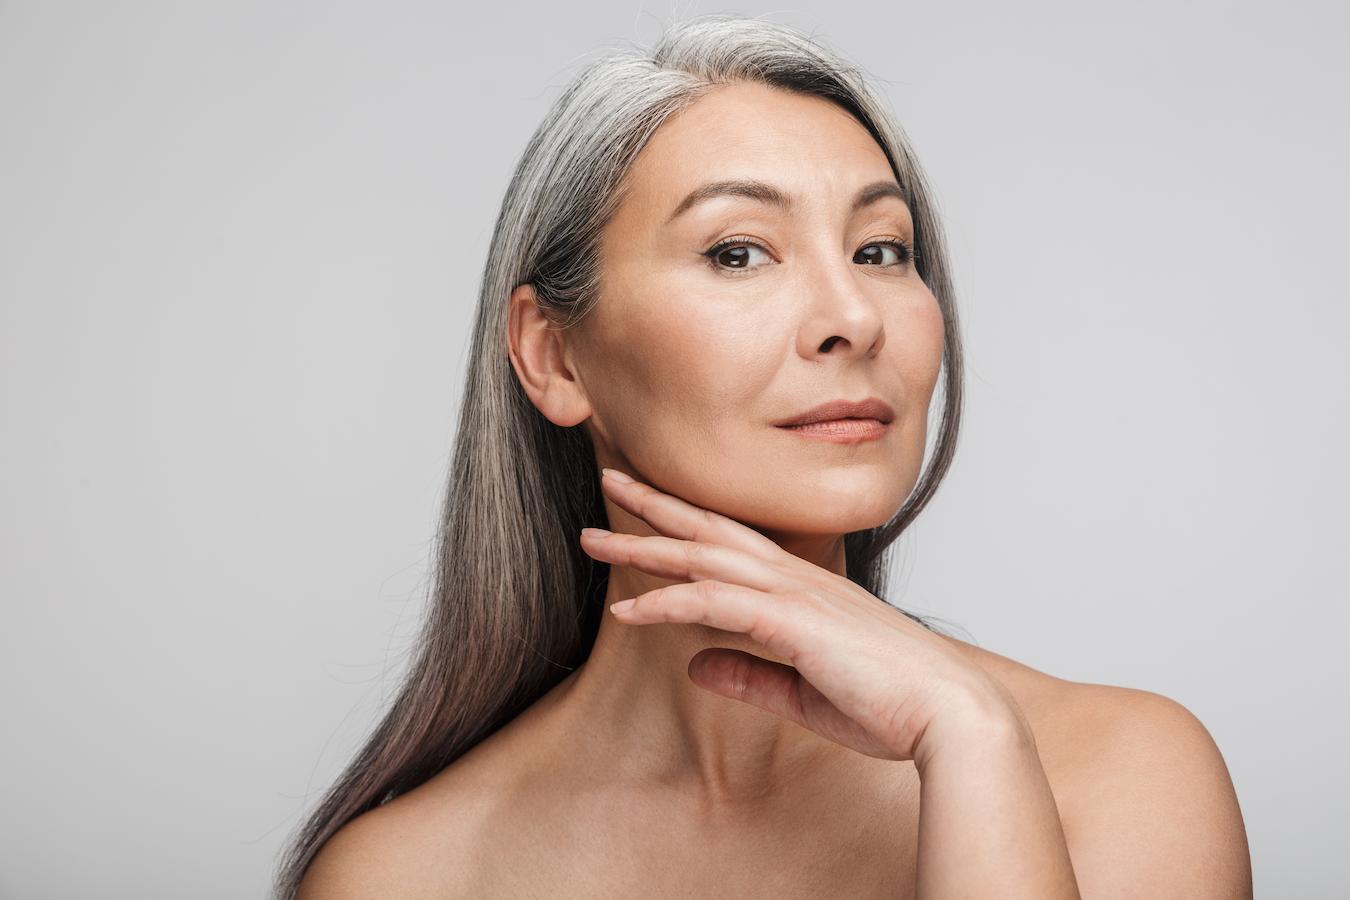 Collagen production helps to get rid of fine lines and wrinkles